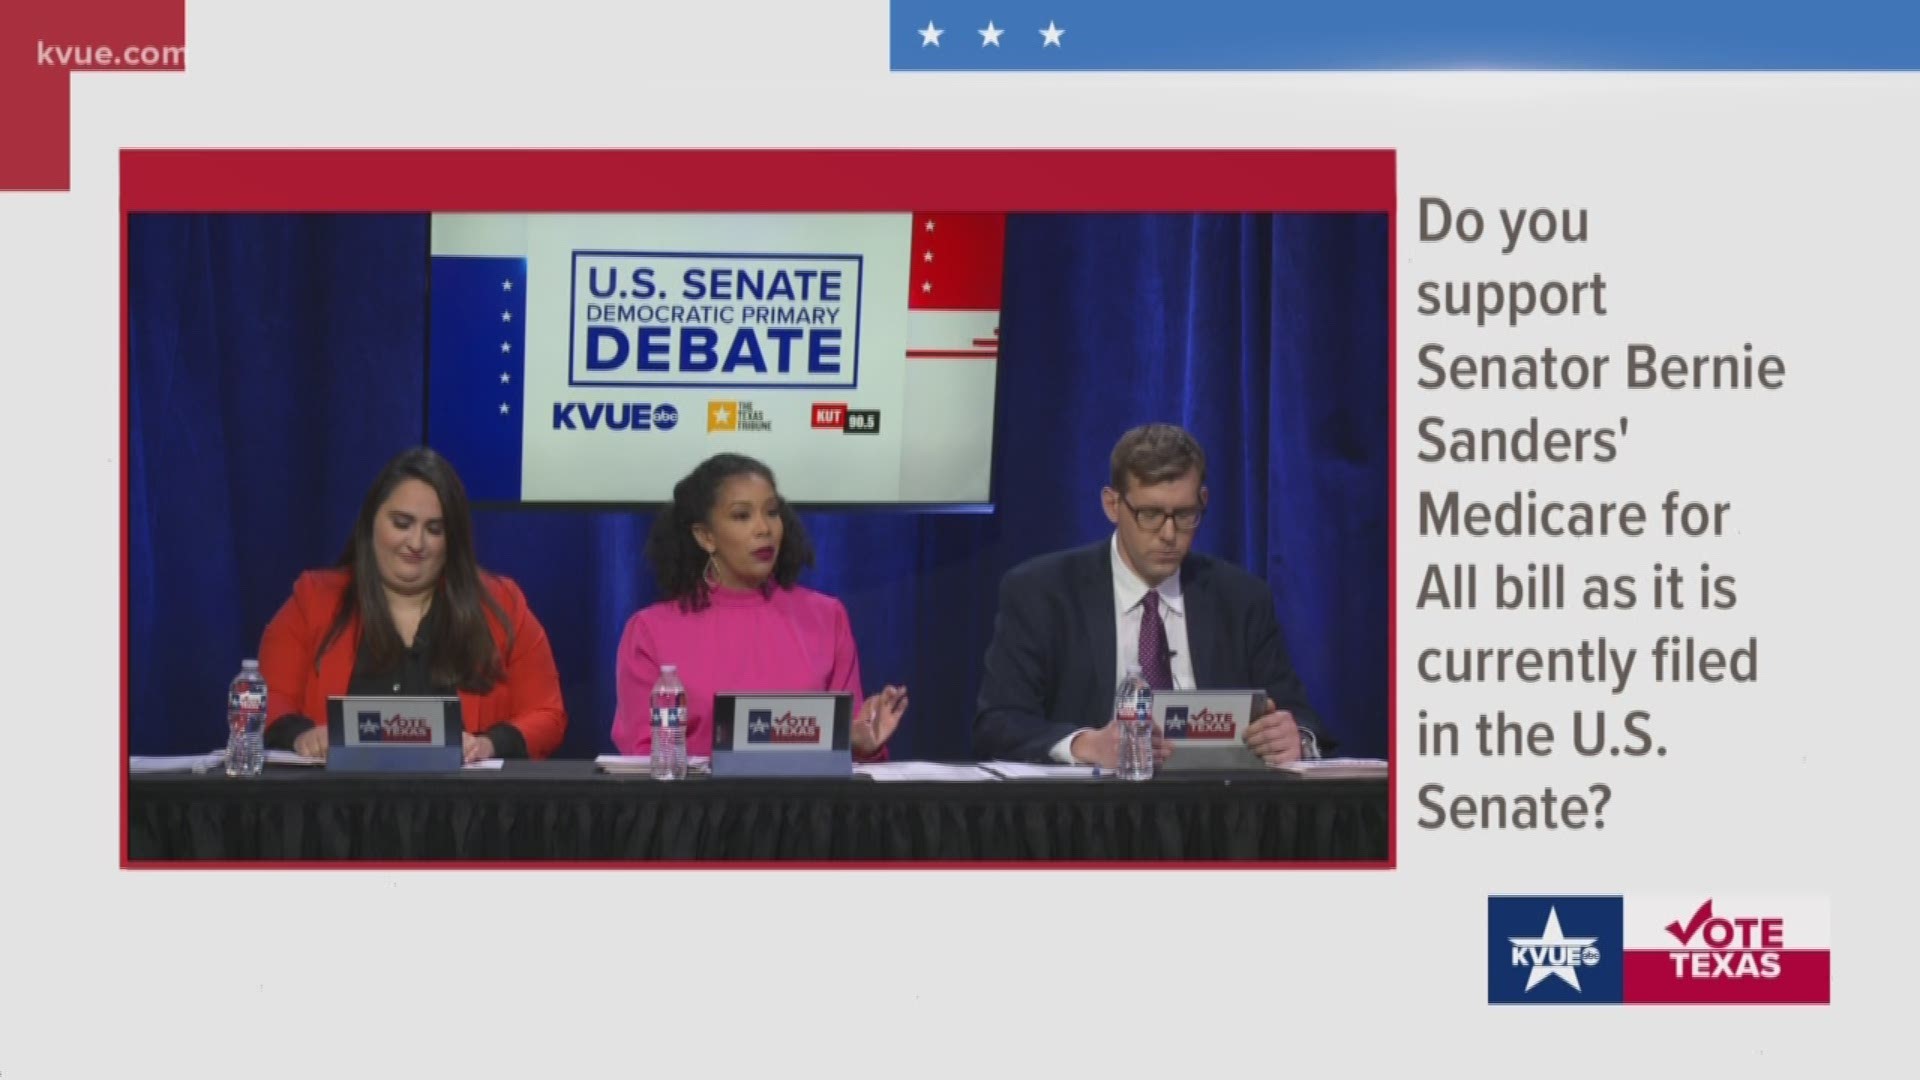 The U.S. Senate Democratic debate candidates were asked whether or not they support Bernie Sanders' Medicare for all bill.